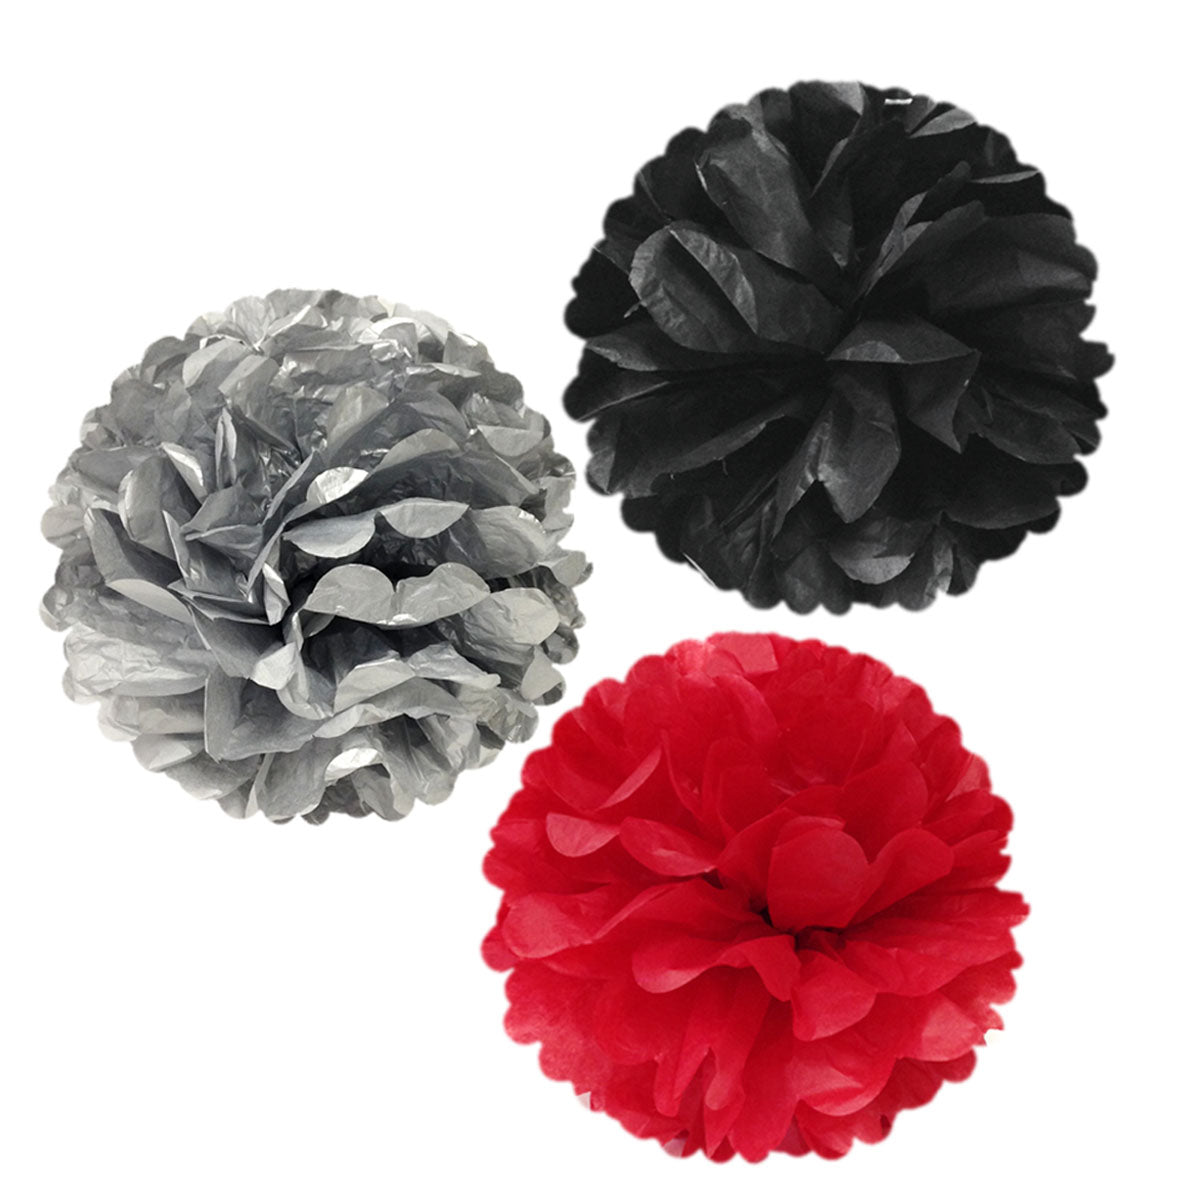 Wrapables 12 Set of 3 Tissue Pom Poms Party Decorations for Weddings, Birthday Parties Baby Showers and Nursery Décor, Kelly Green